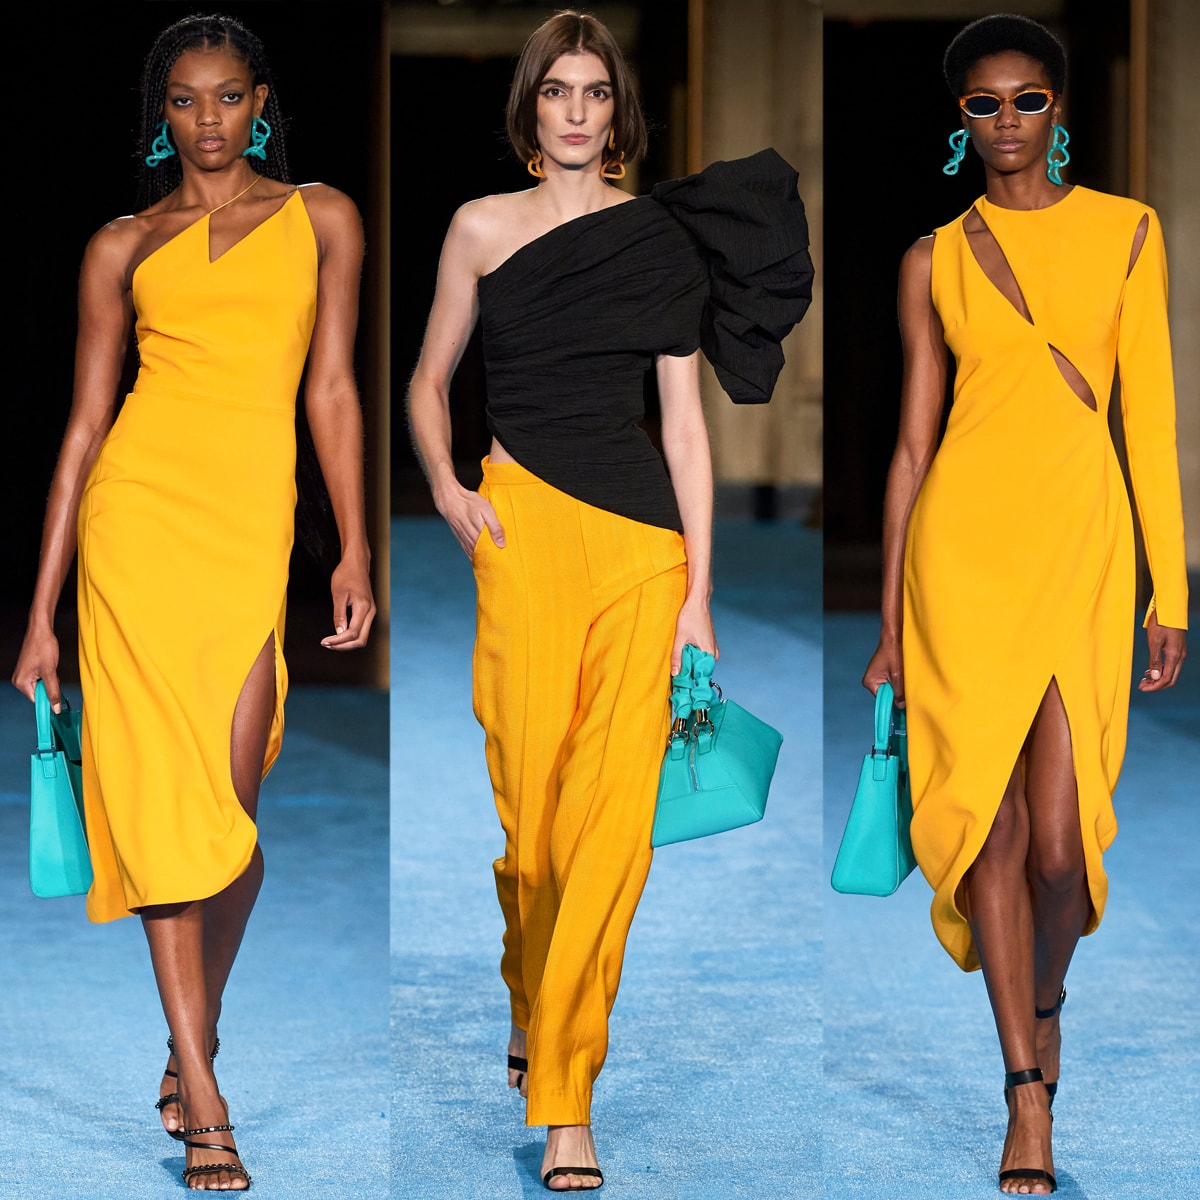 Christian Siriano color-blocked with accessories by styling a sunshine yellow garment with teal blue earrings and a matching bag for his Spring/Summer 2022 collection